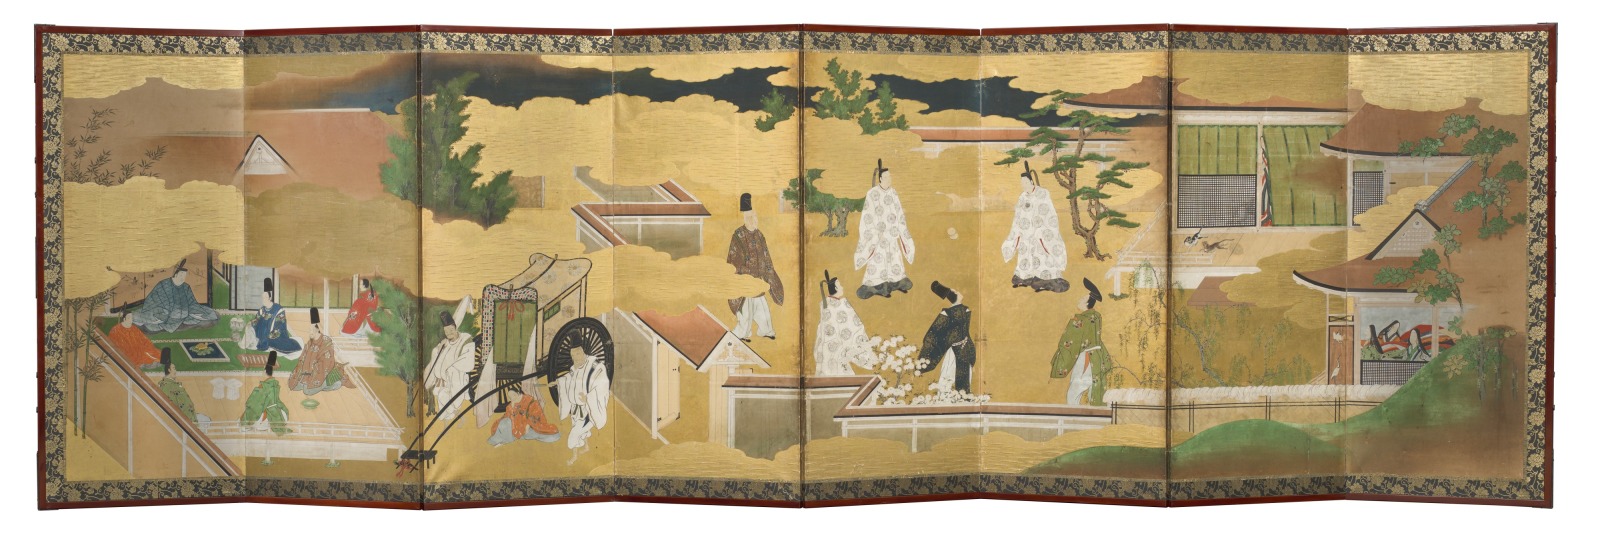 Scenes from the Tale of Genji